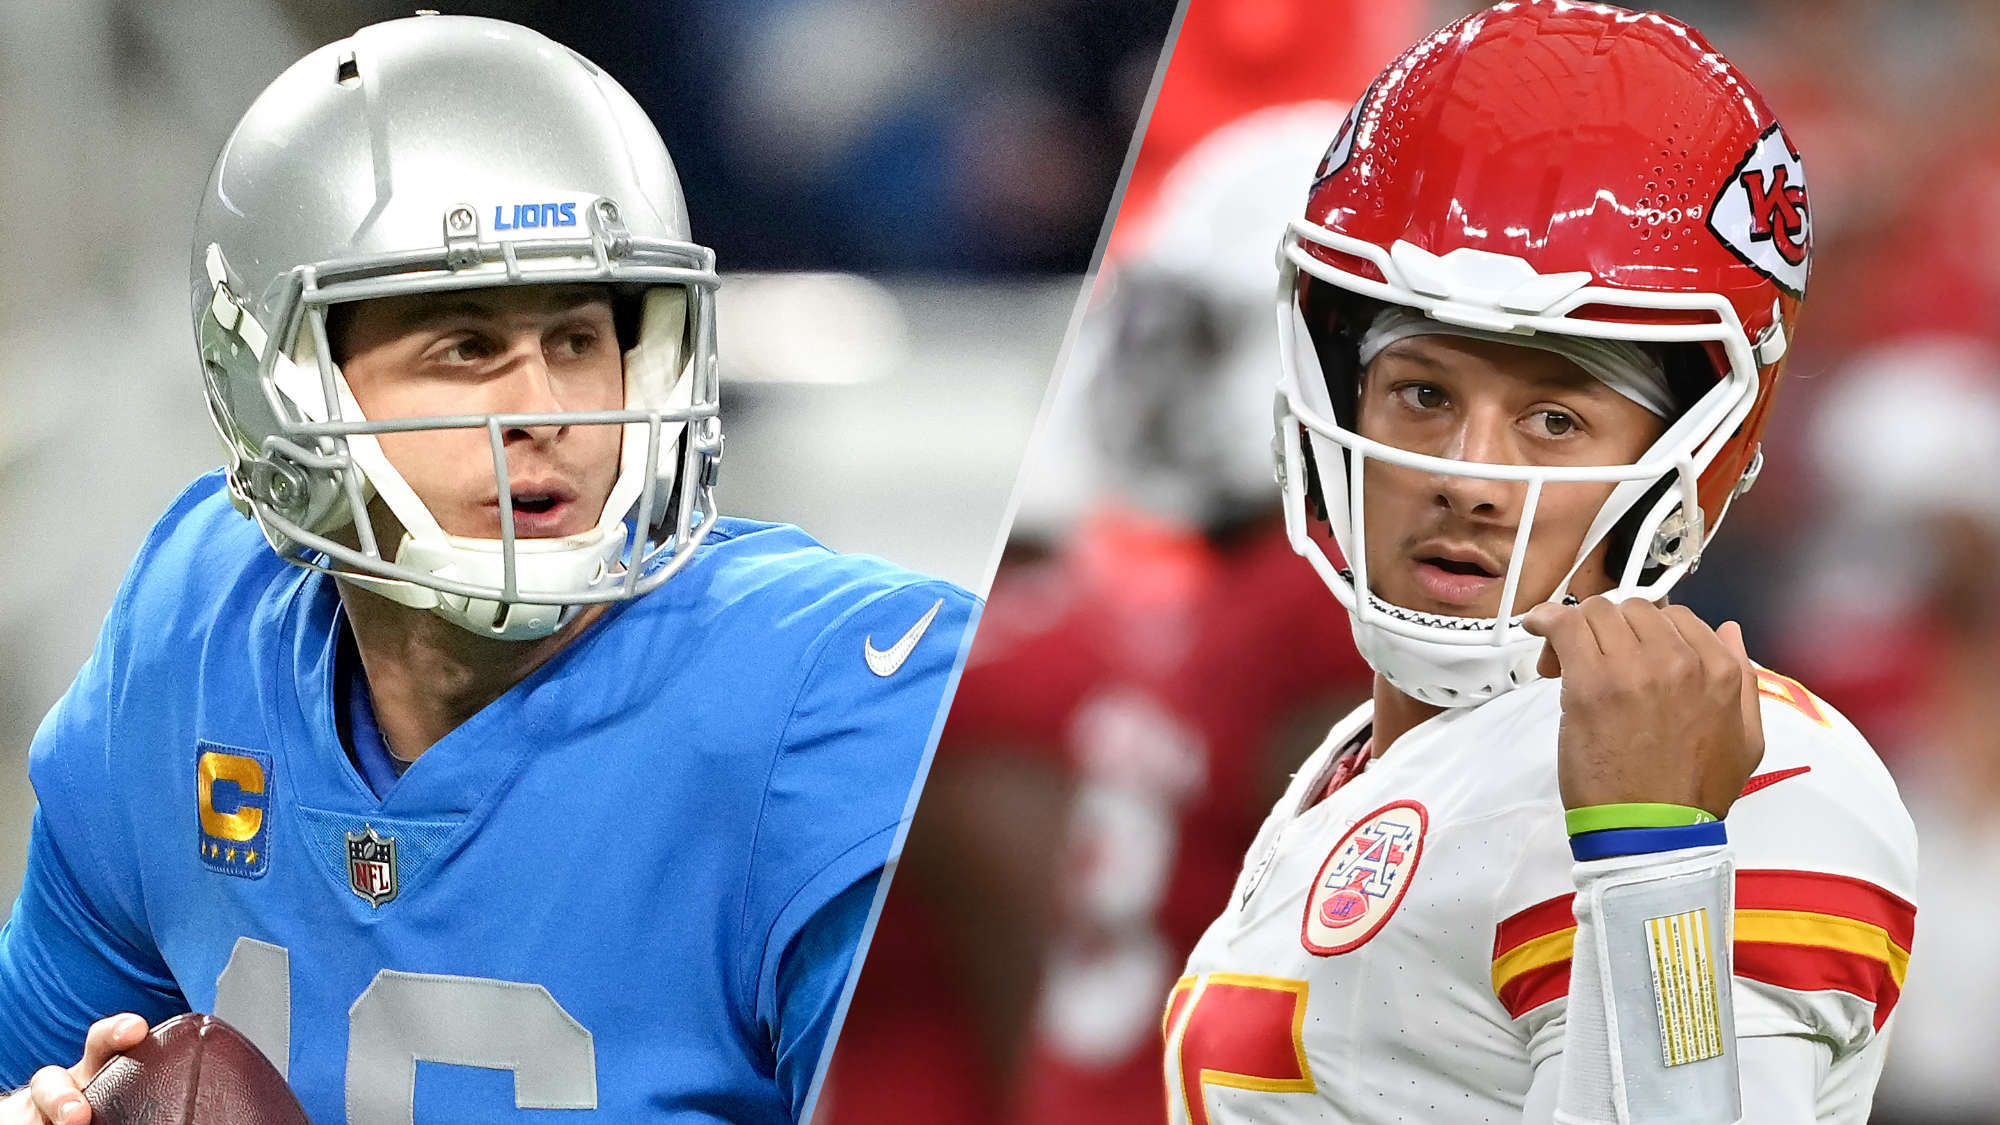 Lions vs Chiefs live stream: How to watch NFL game online tonight